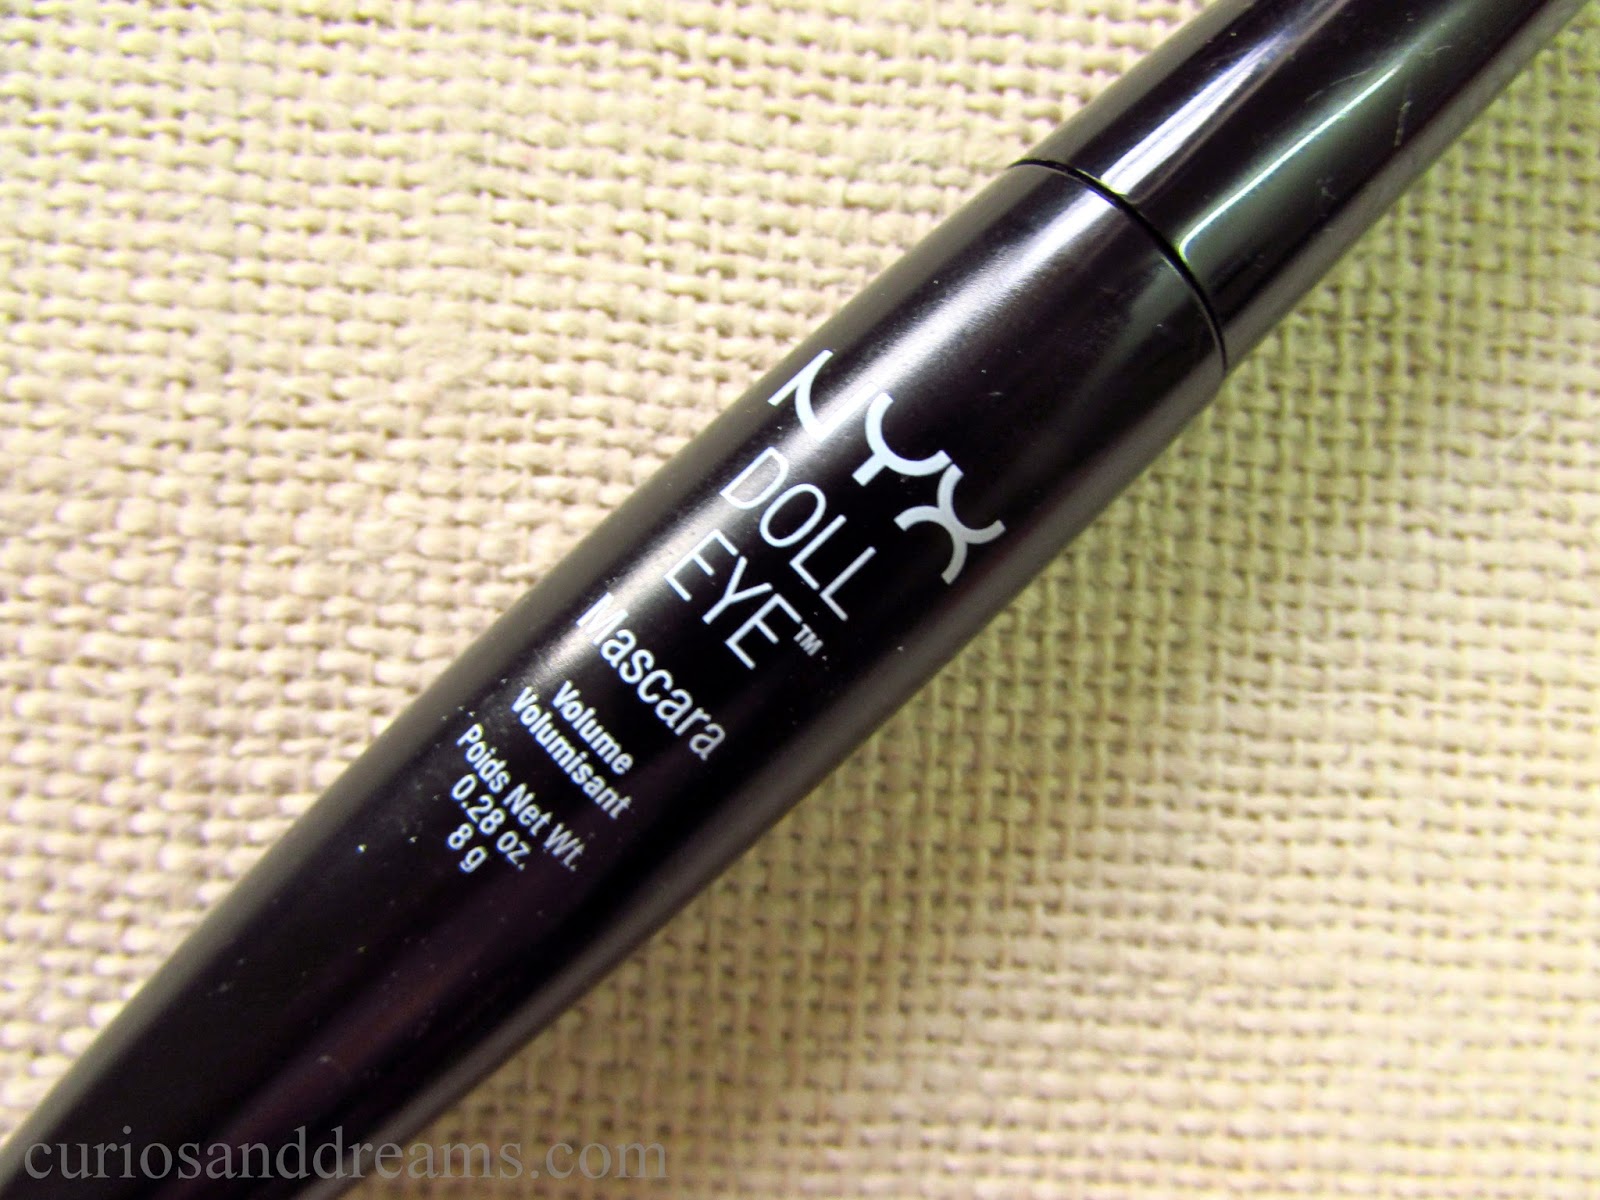 Doll Eye Mascara : Review - Curios and Dreams - Indian Skincare and Beauty